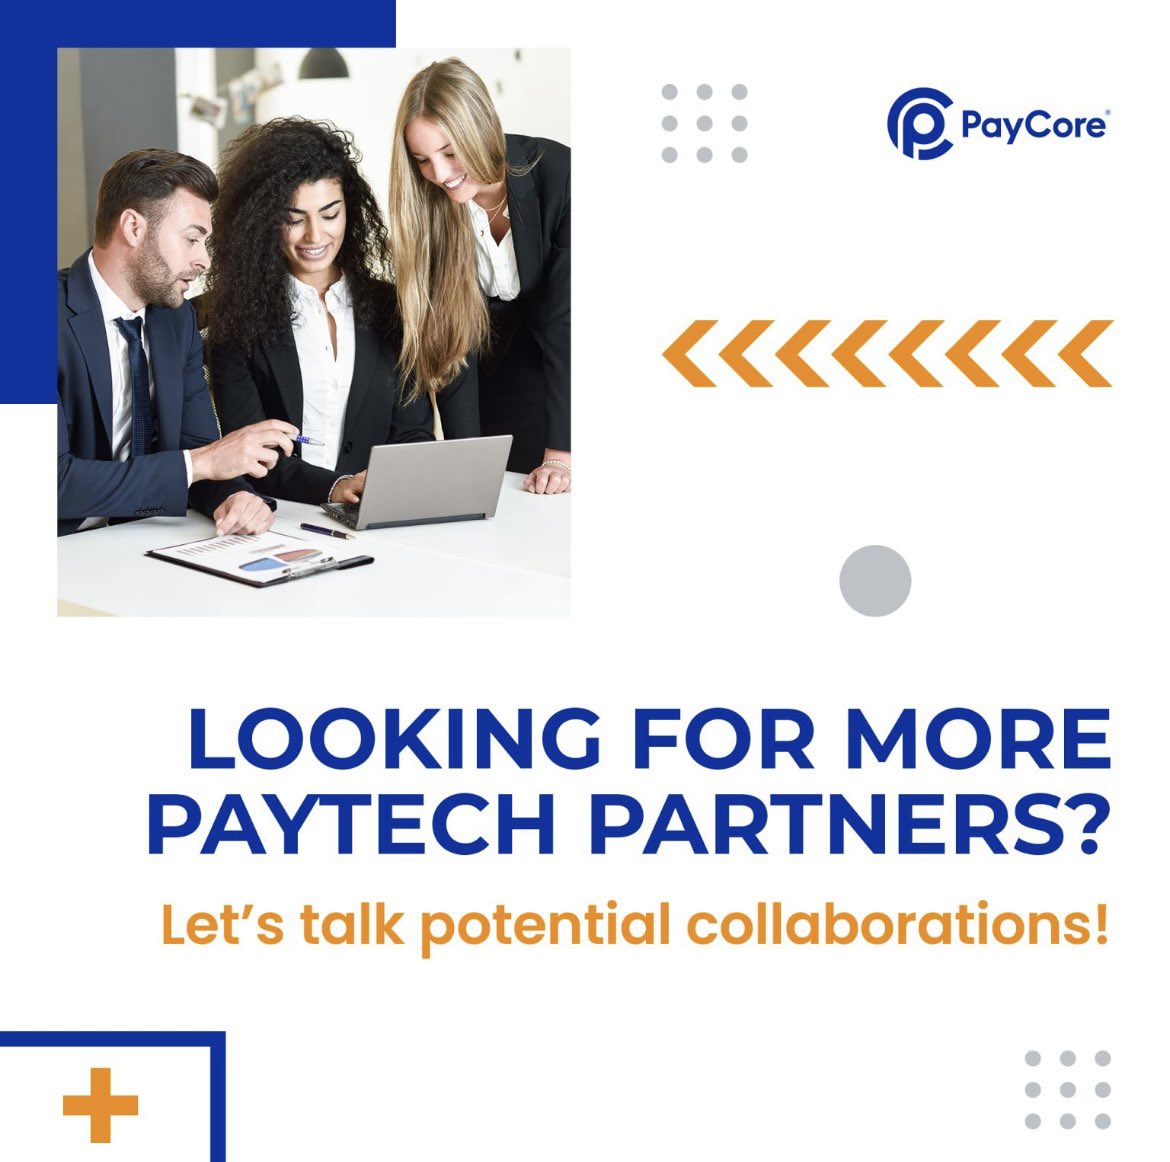 🚀Are you looking for strategic partnerships in payments tech? Let's grow together, visit paycore.com and reach us at info@paycore.com now!🙌
 
#fintechnews #banking #mcommerce #neobanking #expansion #partnerships #technologypartner #fintechpartnership #lifeatPayCore